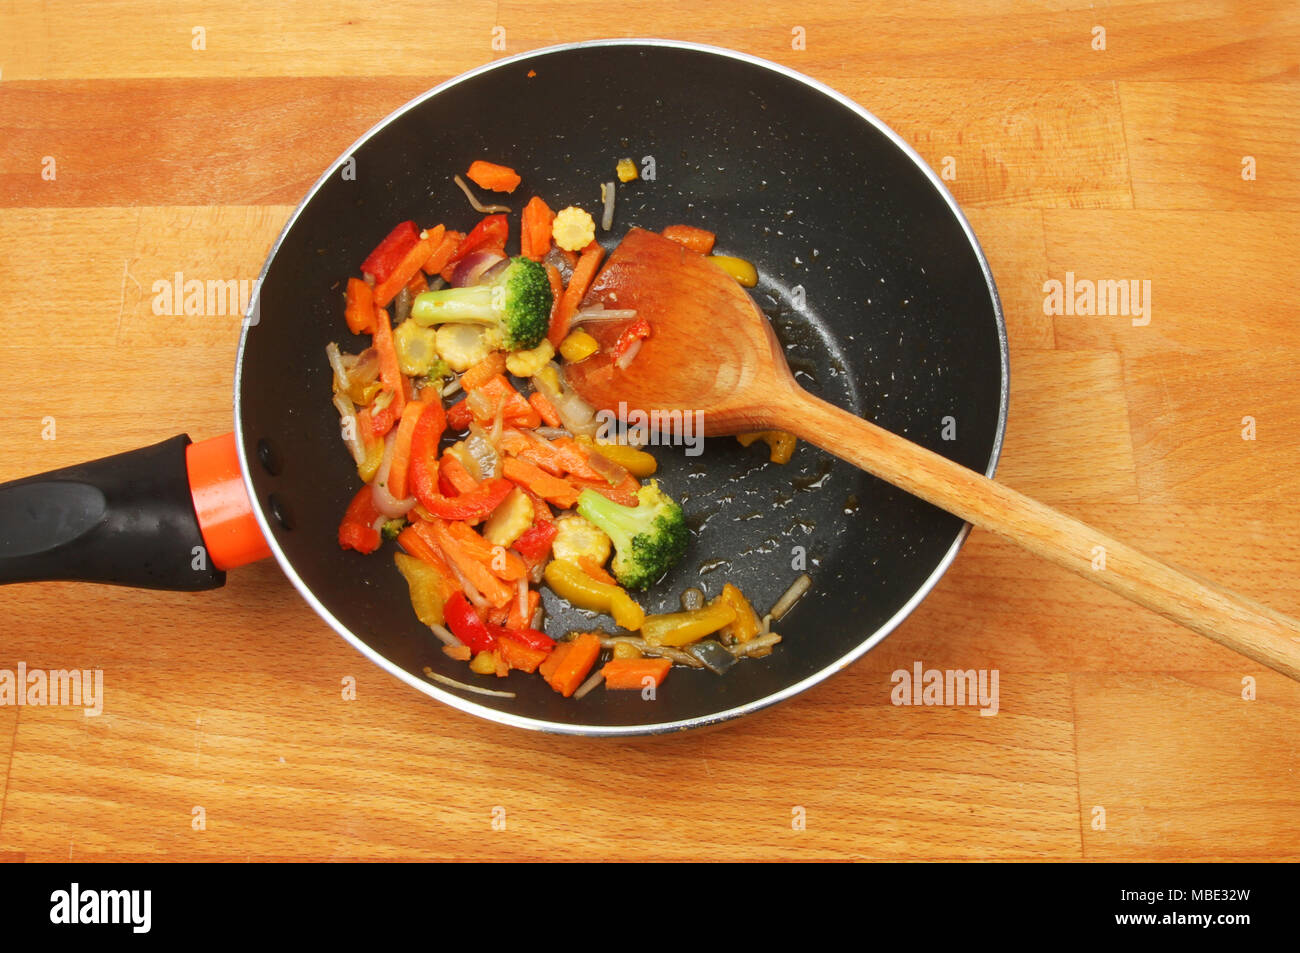 Stir fried vegetables in a wok with a wooden spoon on a wooden worktop Stock Photo